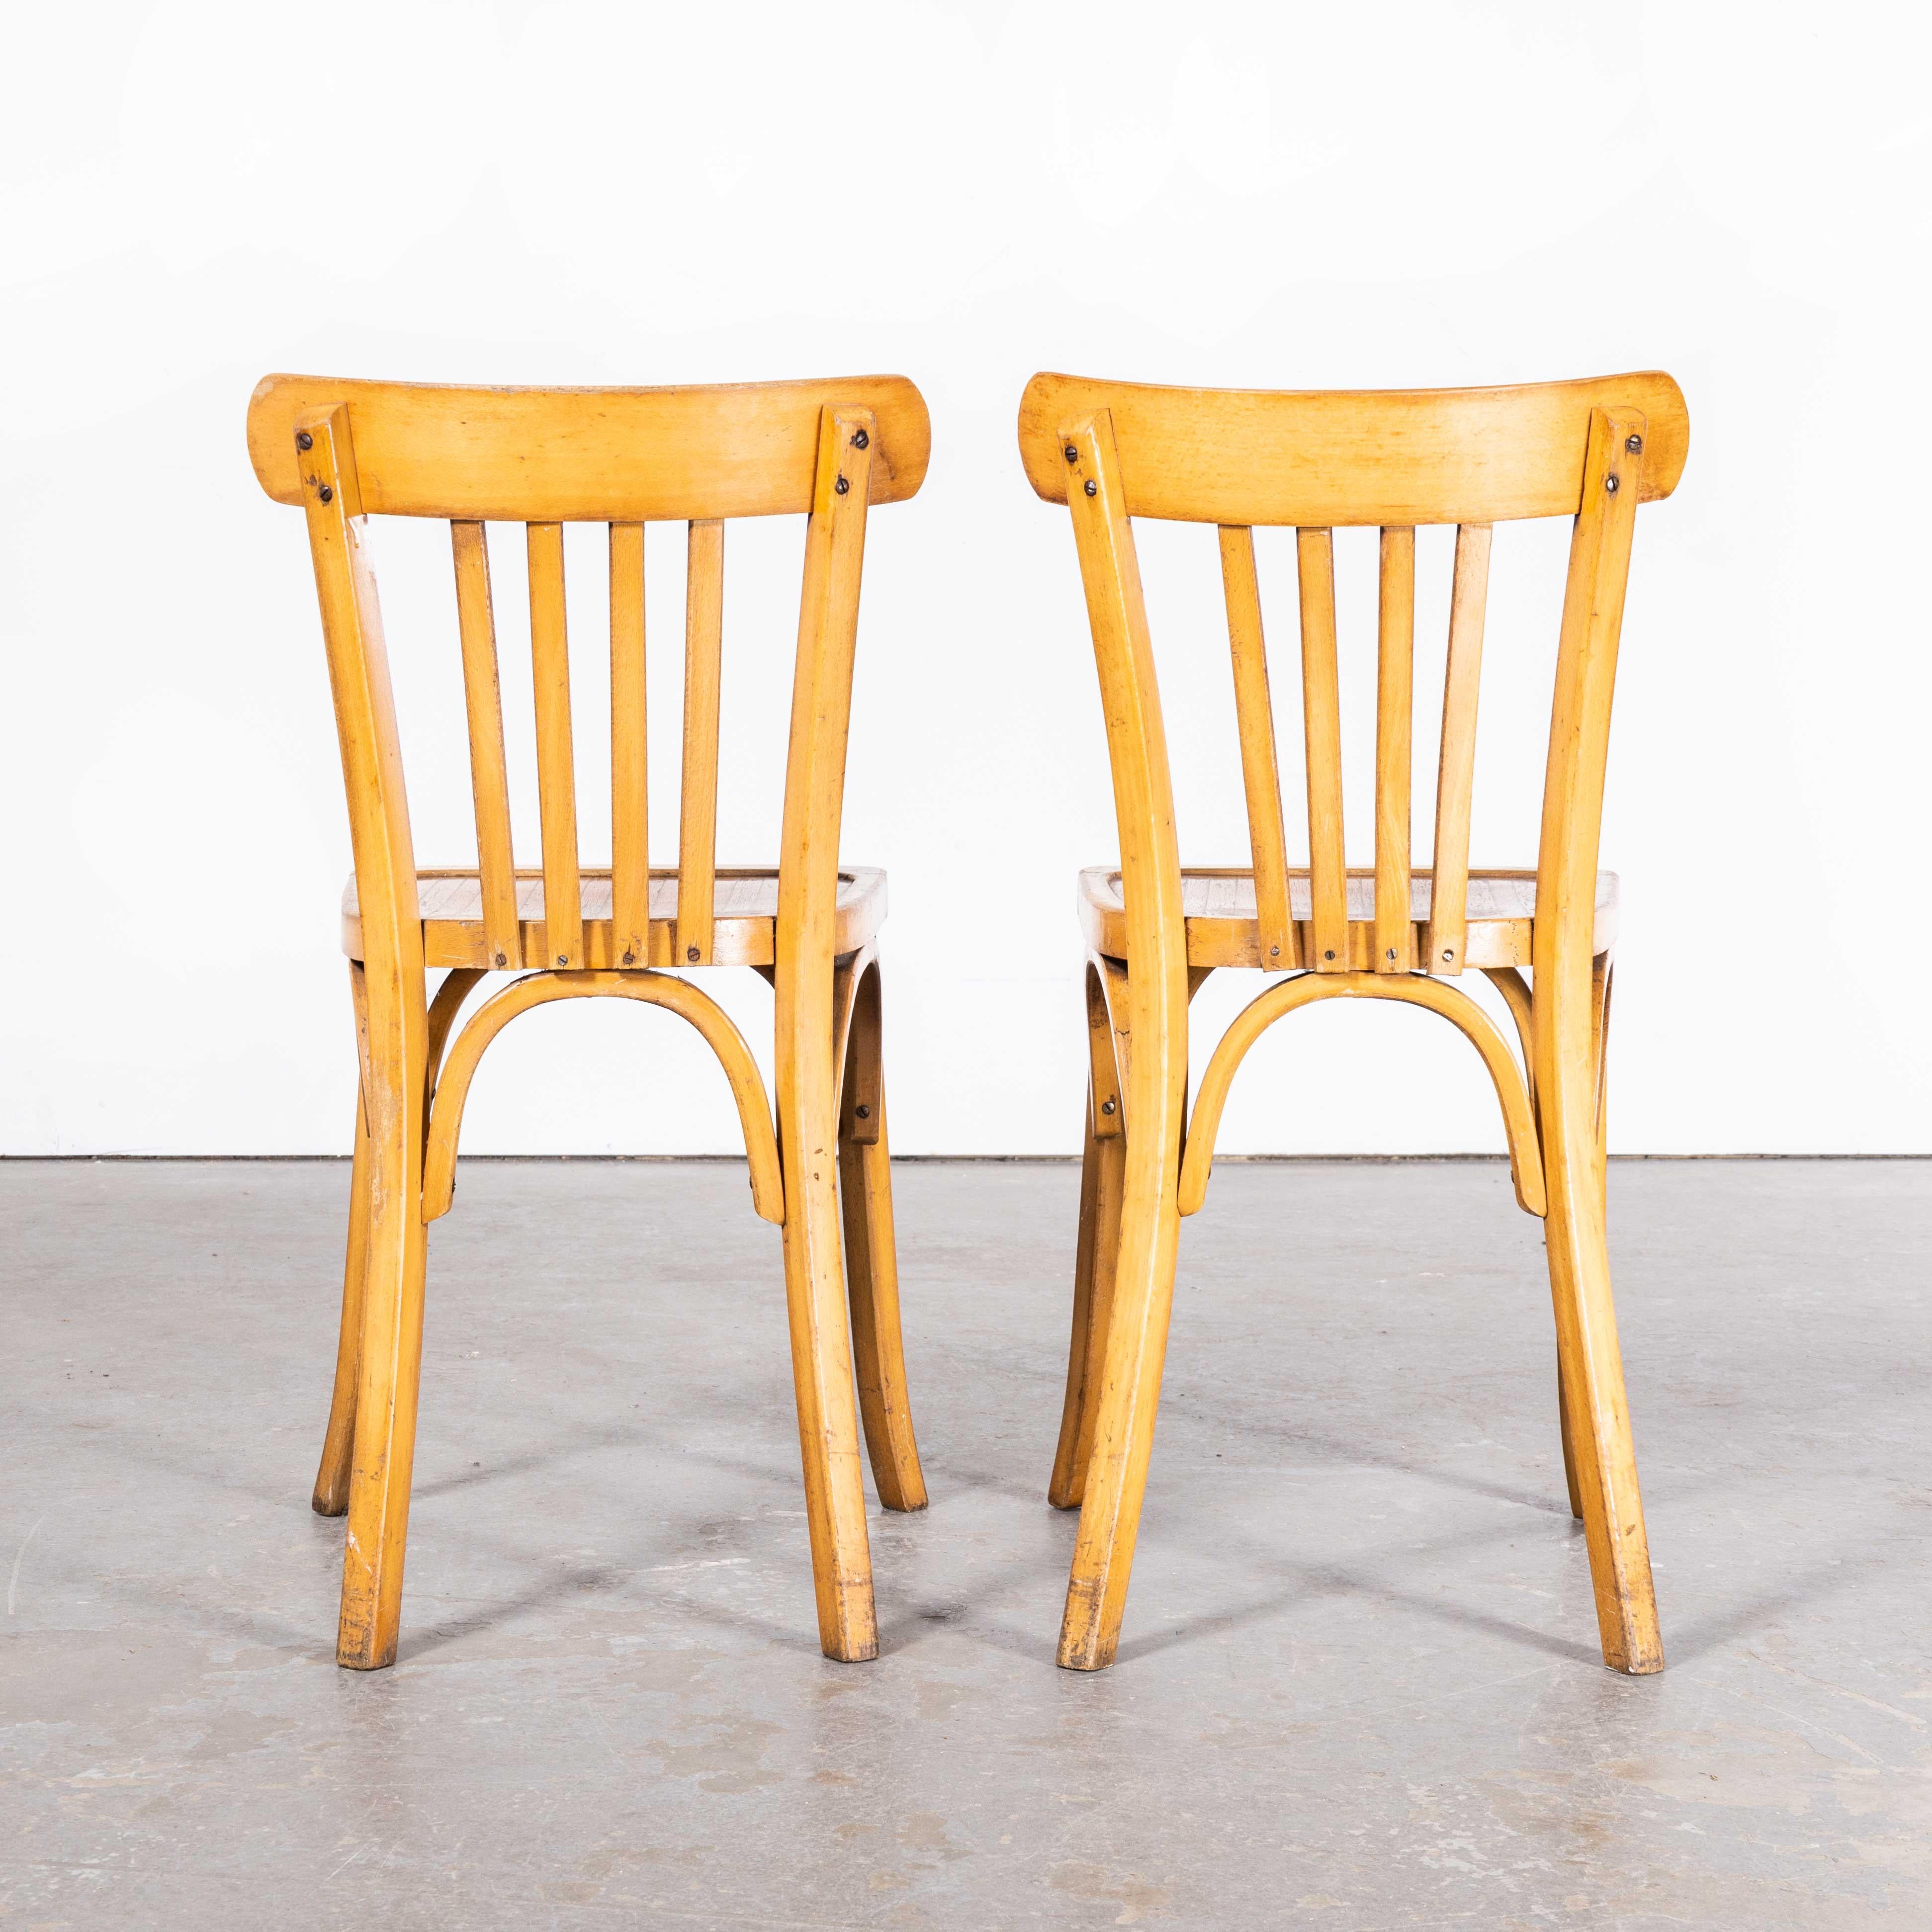 1950s Luterma Blonde Oak Bentwood Dining Chair - Set of Pair For Sale 2